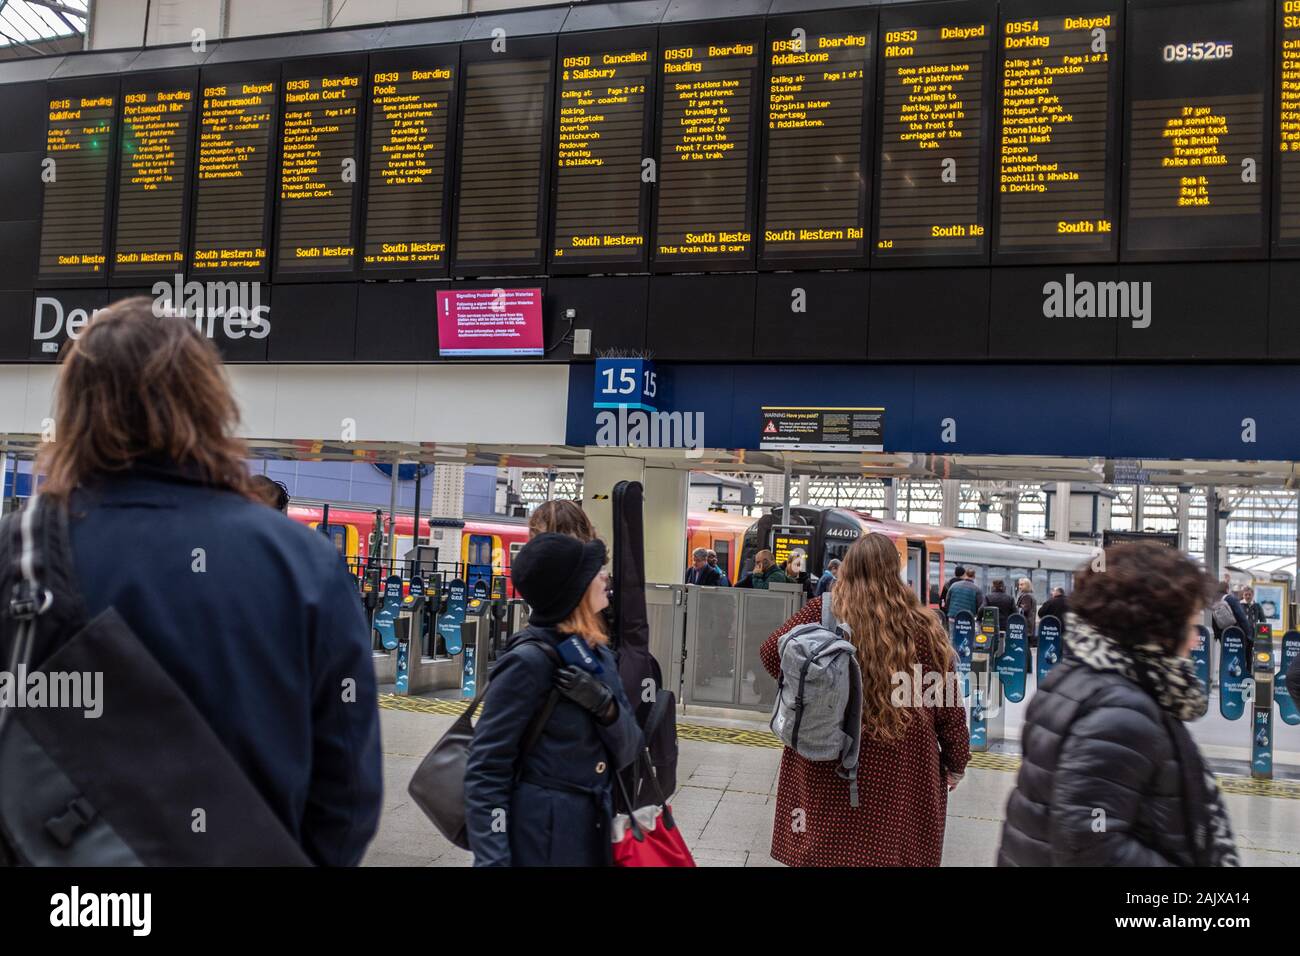 Train delays and cancelations on display at Waterloo Station, London, UK Stock Photo